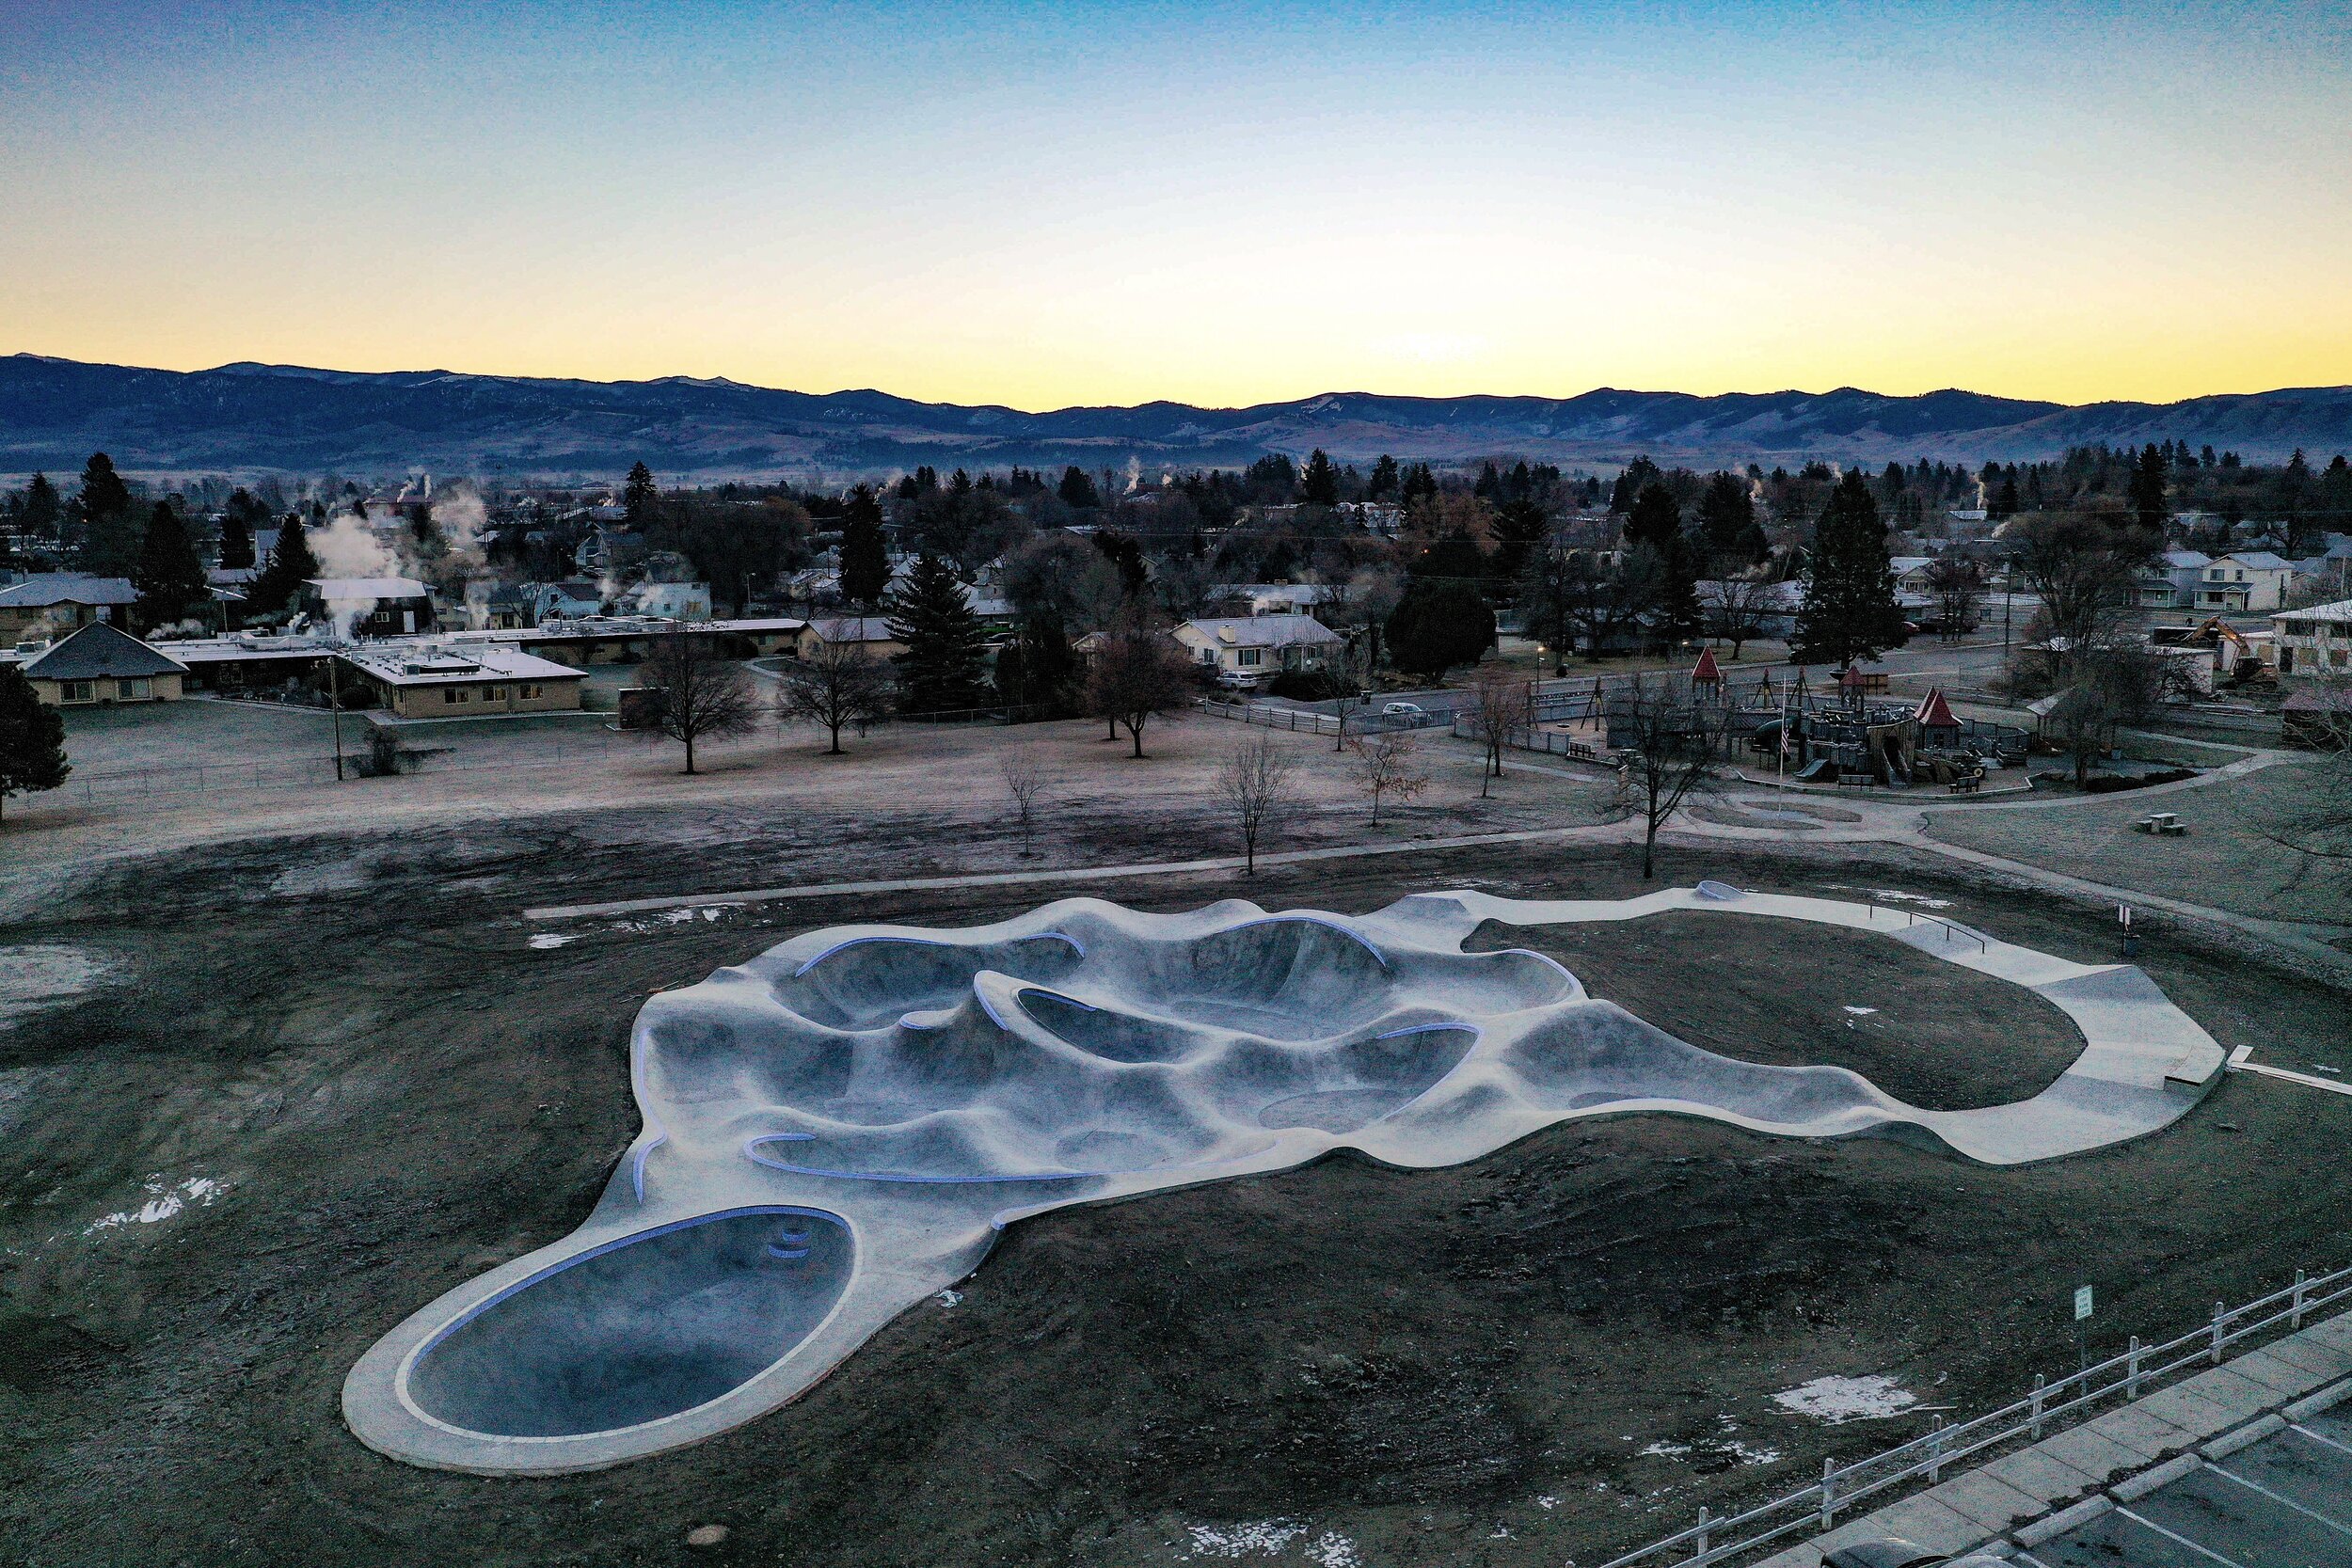 Chances are you have never seen or skated a park quite like the Hamilton, Montana skatepark - she’s out of this world 🚀